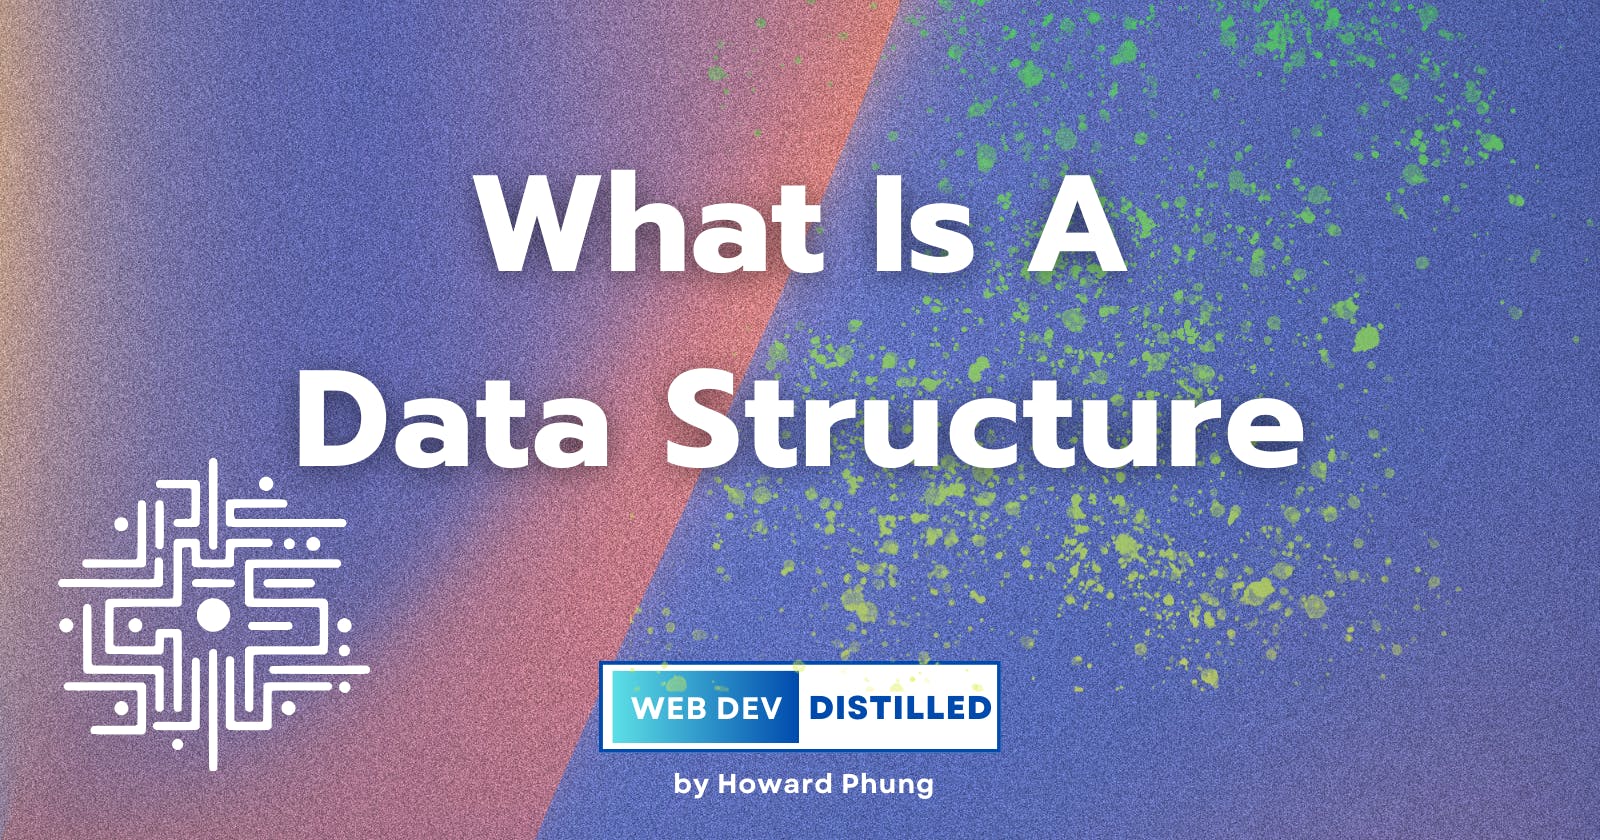 What Is A Data Structure?